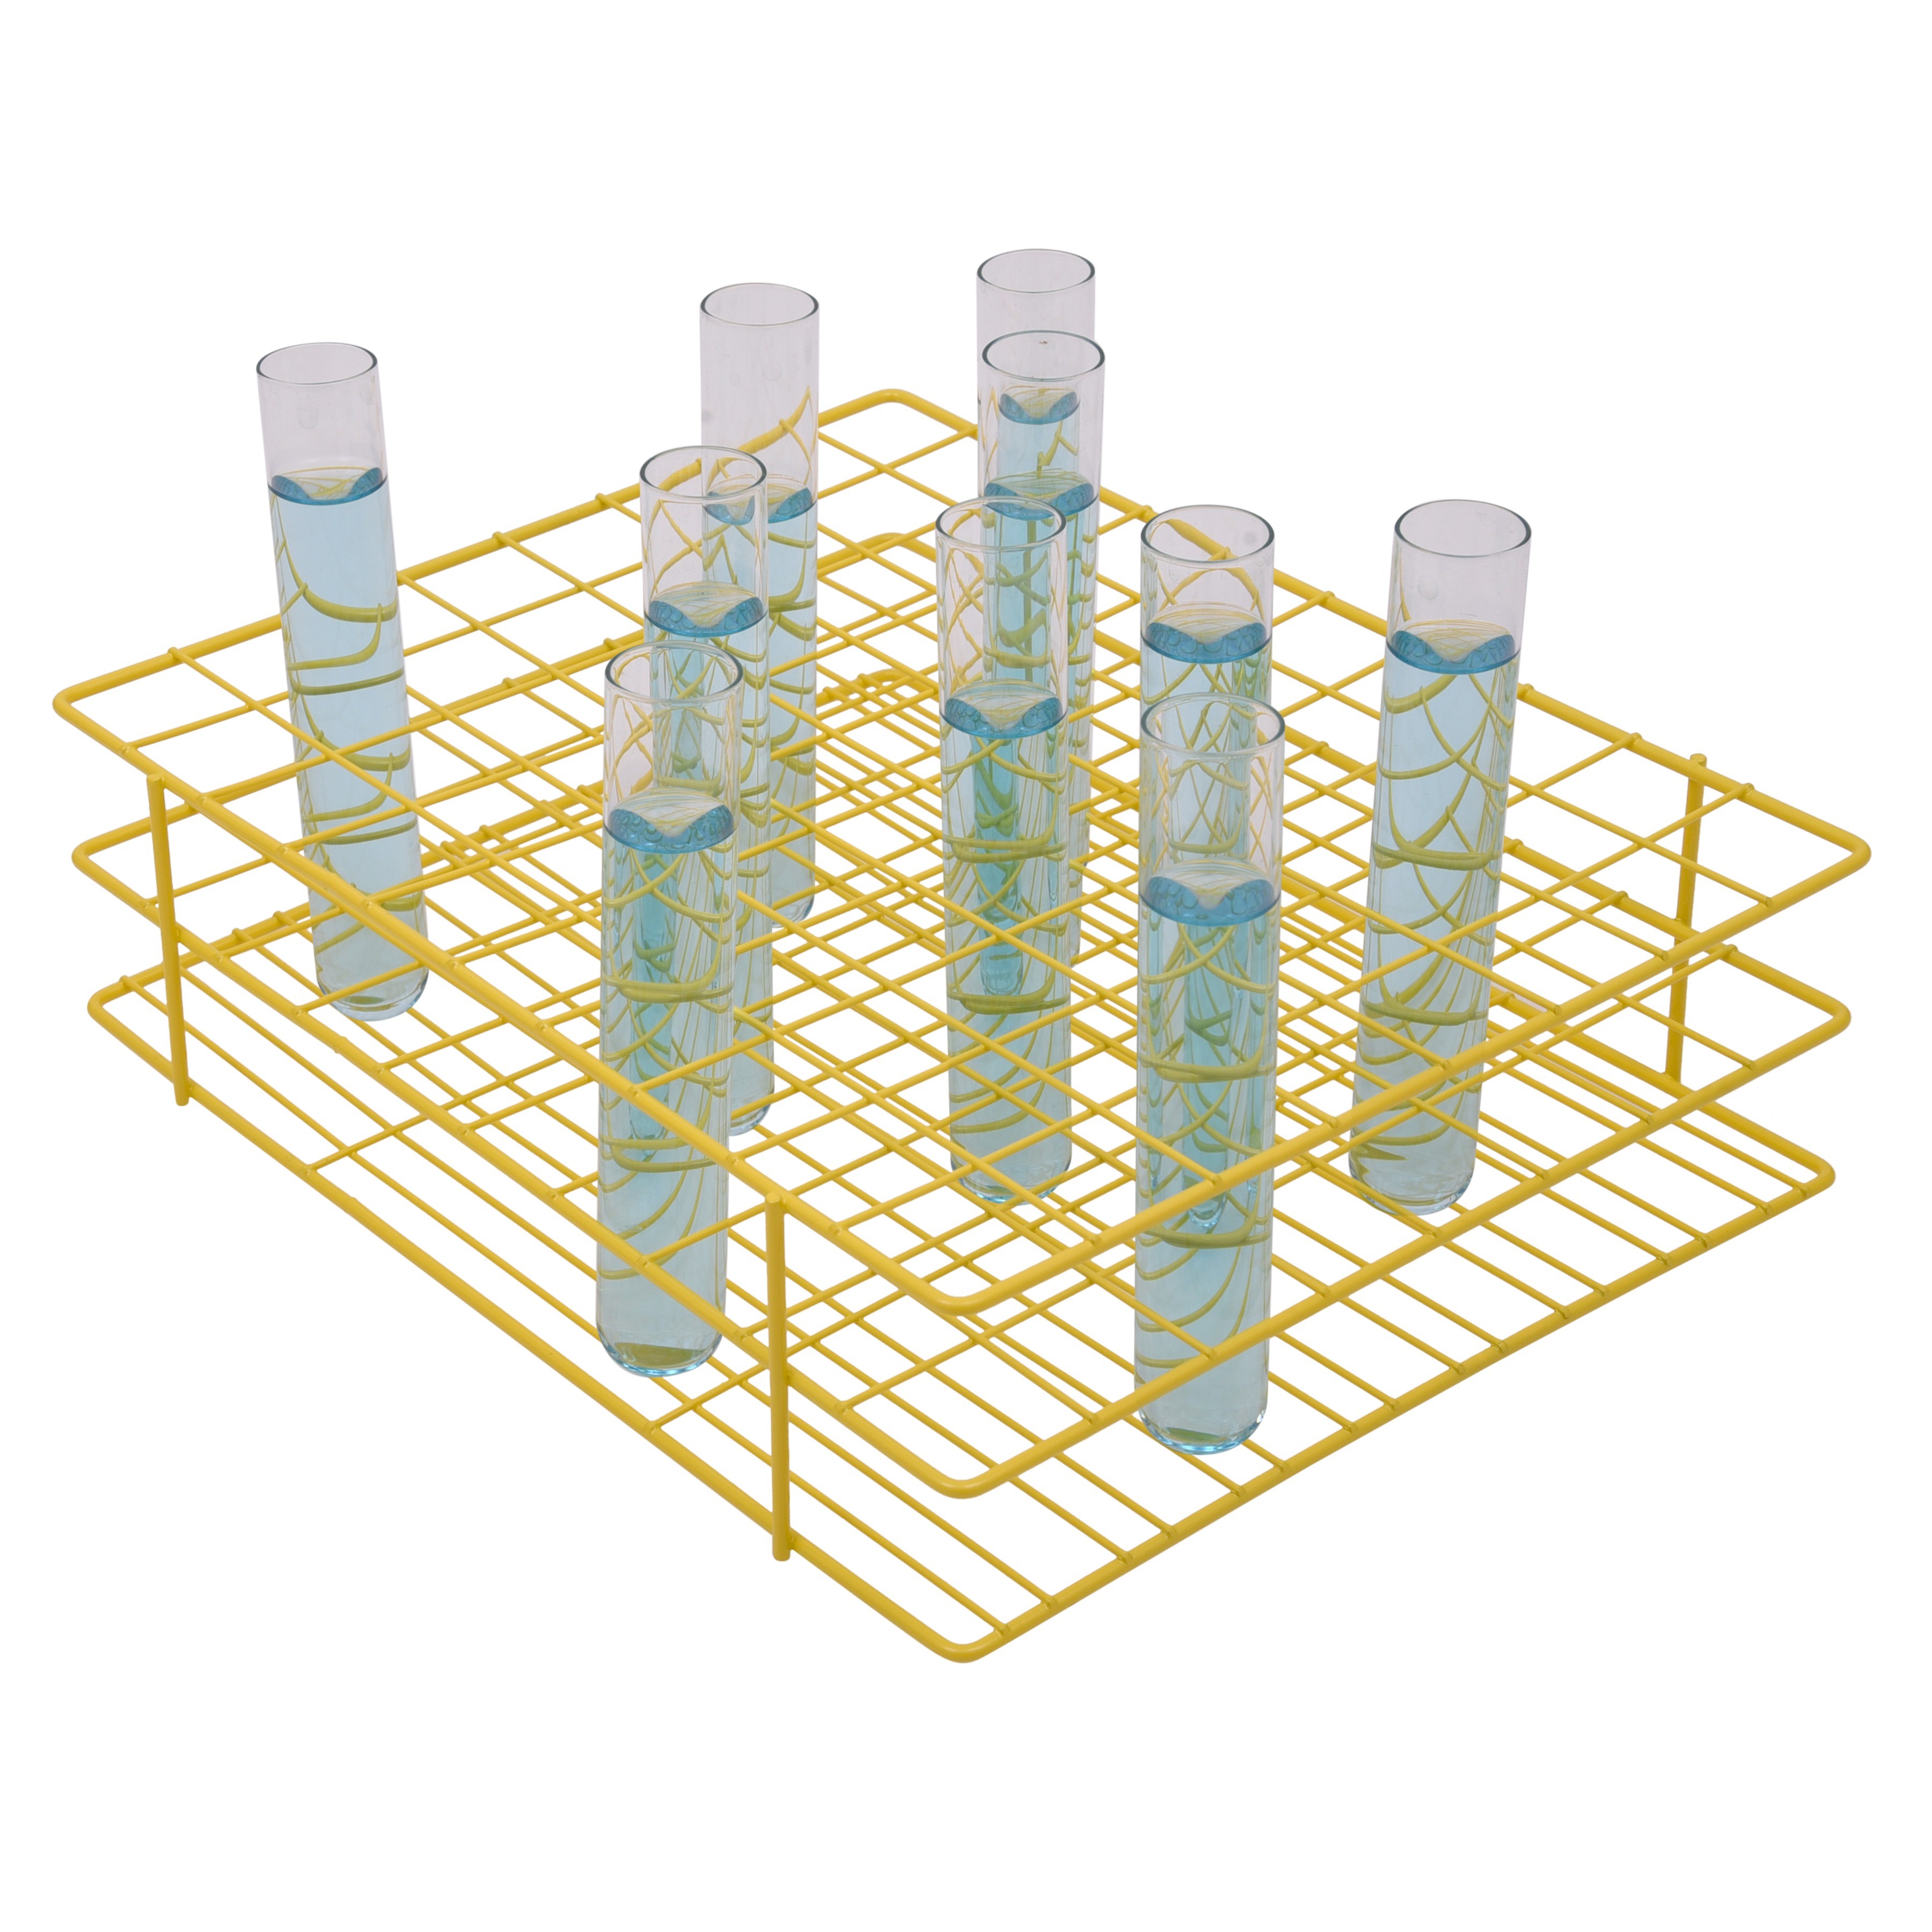 SP Bel-Art Poxygrid Test Tube Rack; For 20-25mm Tubes, 80 Places, Yellow